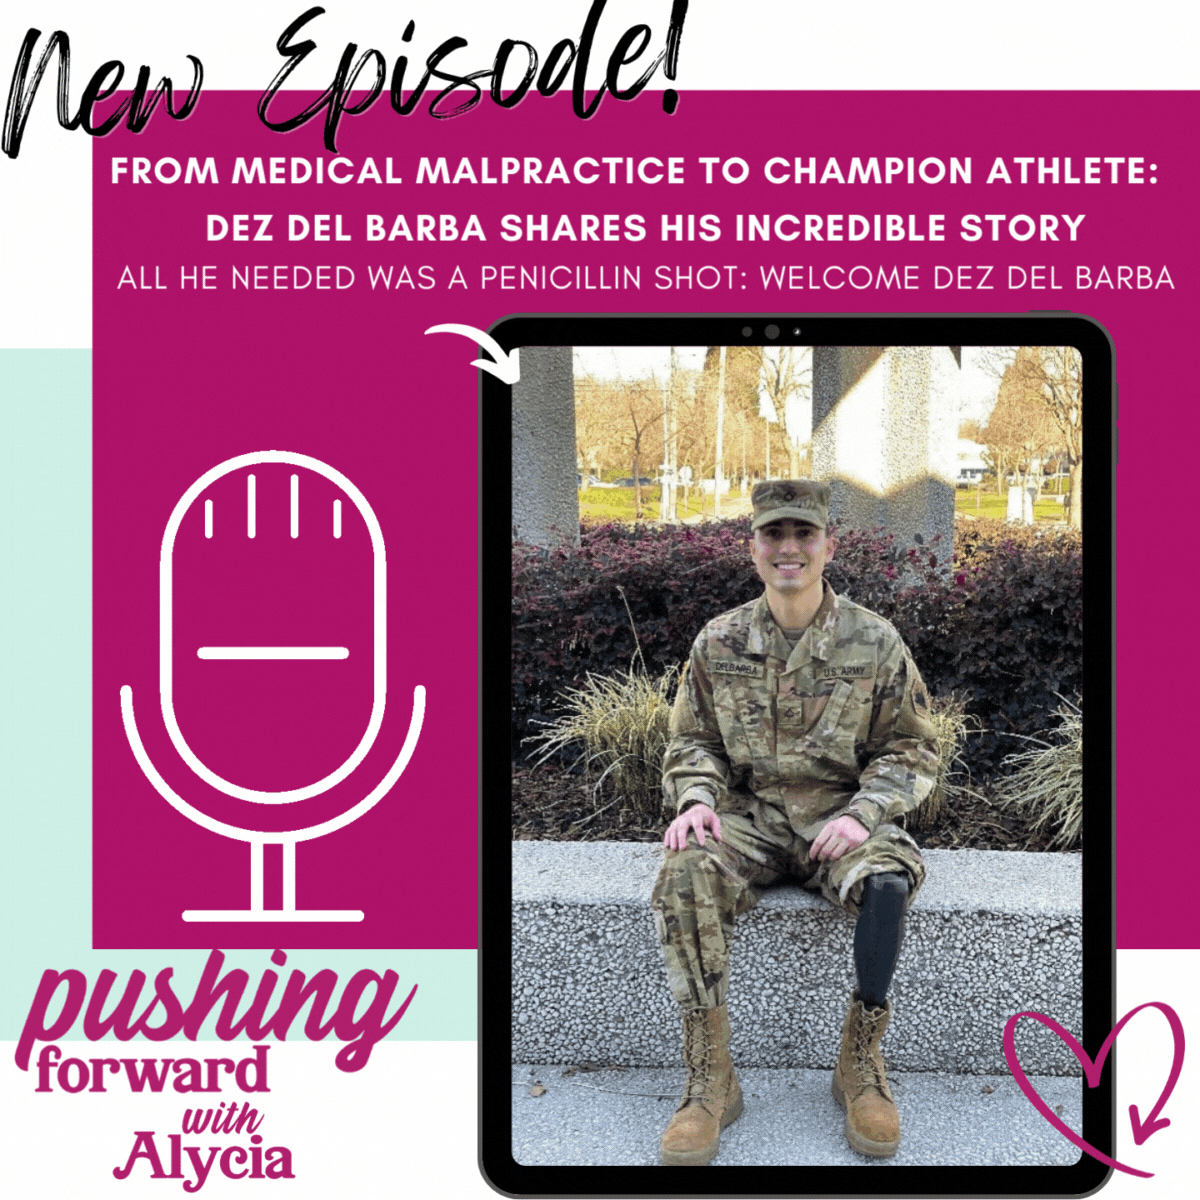 new episode pushing forward with alycia dez del barba talks about medical malpractice in the military to playing wheelchair tennis